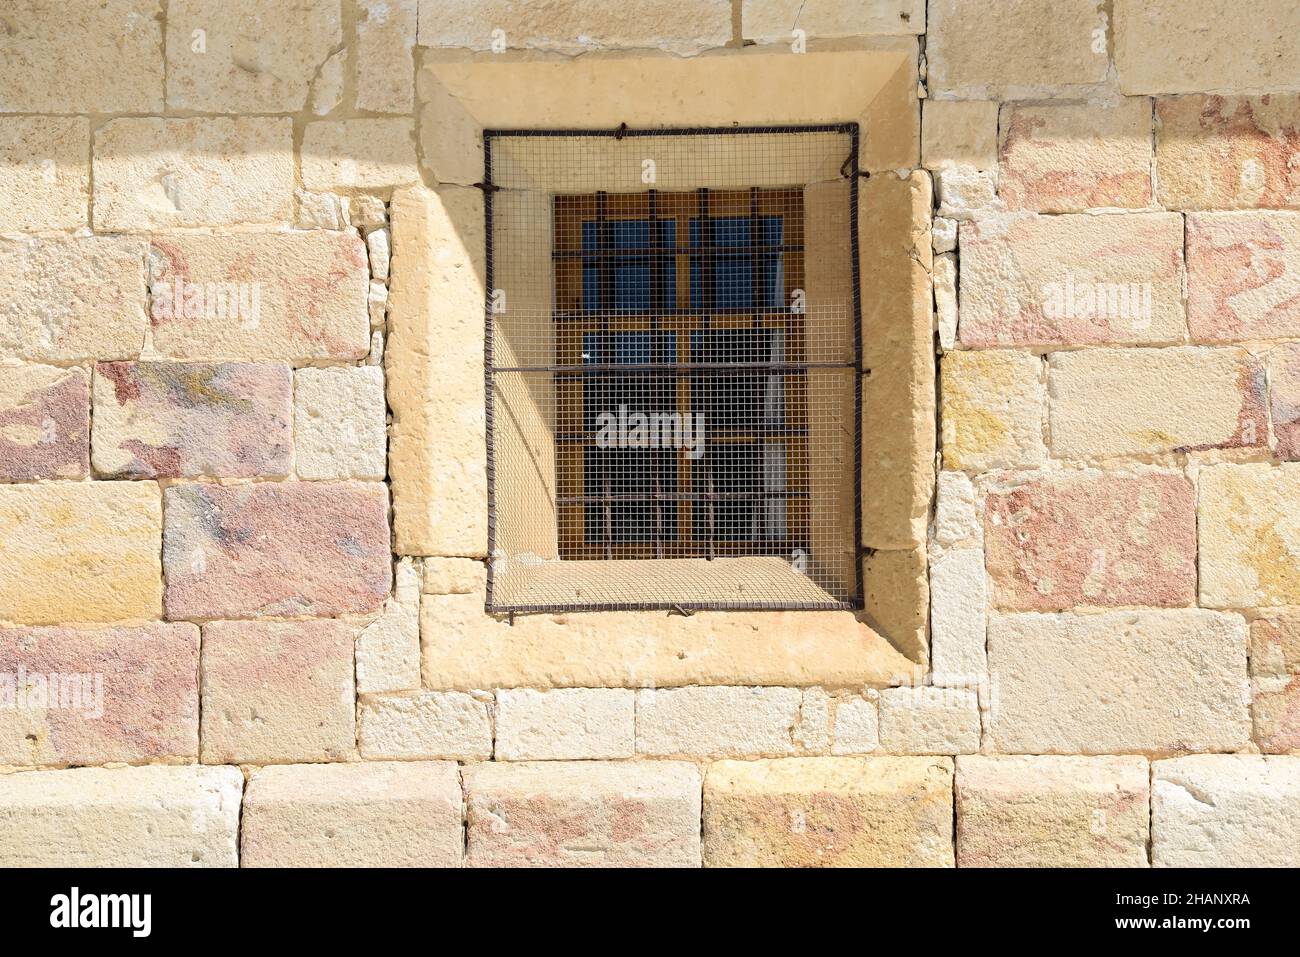 Old lattice window in the stone wall of a building in a town of Zamora, Spain, Europe illuminated by sunlight in summer. Stock Photo